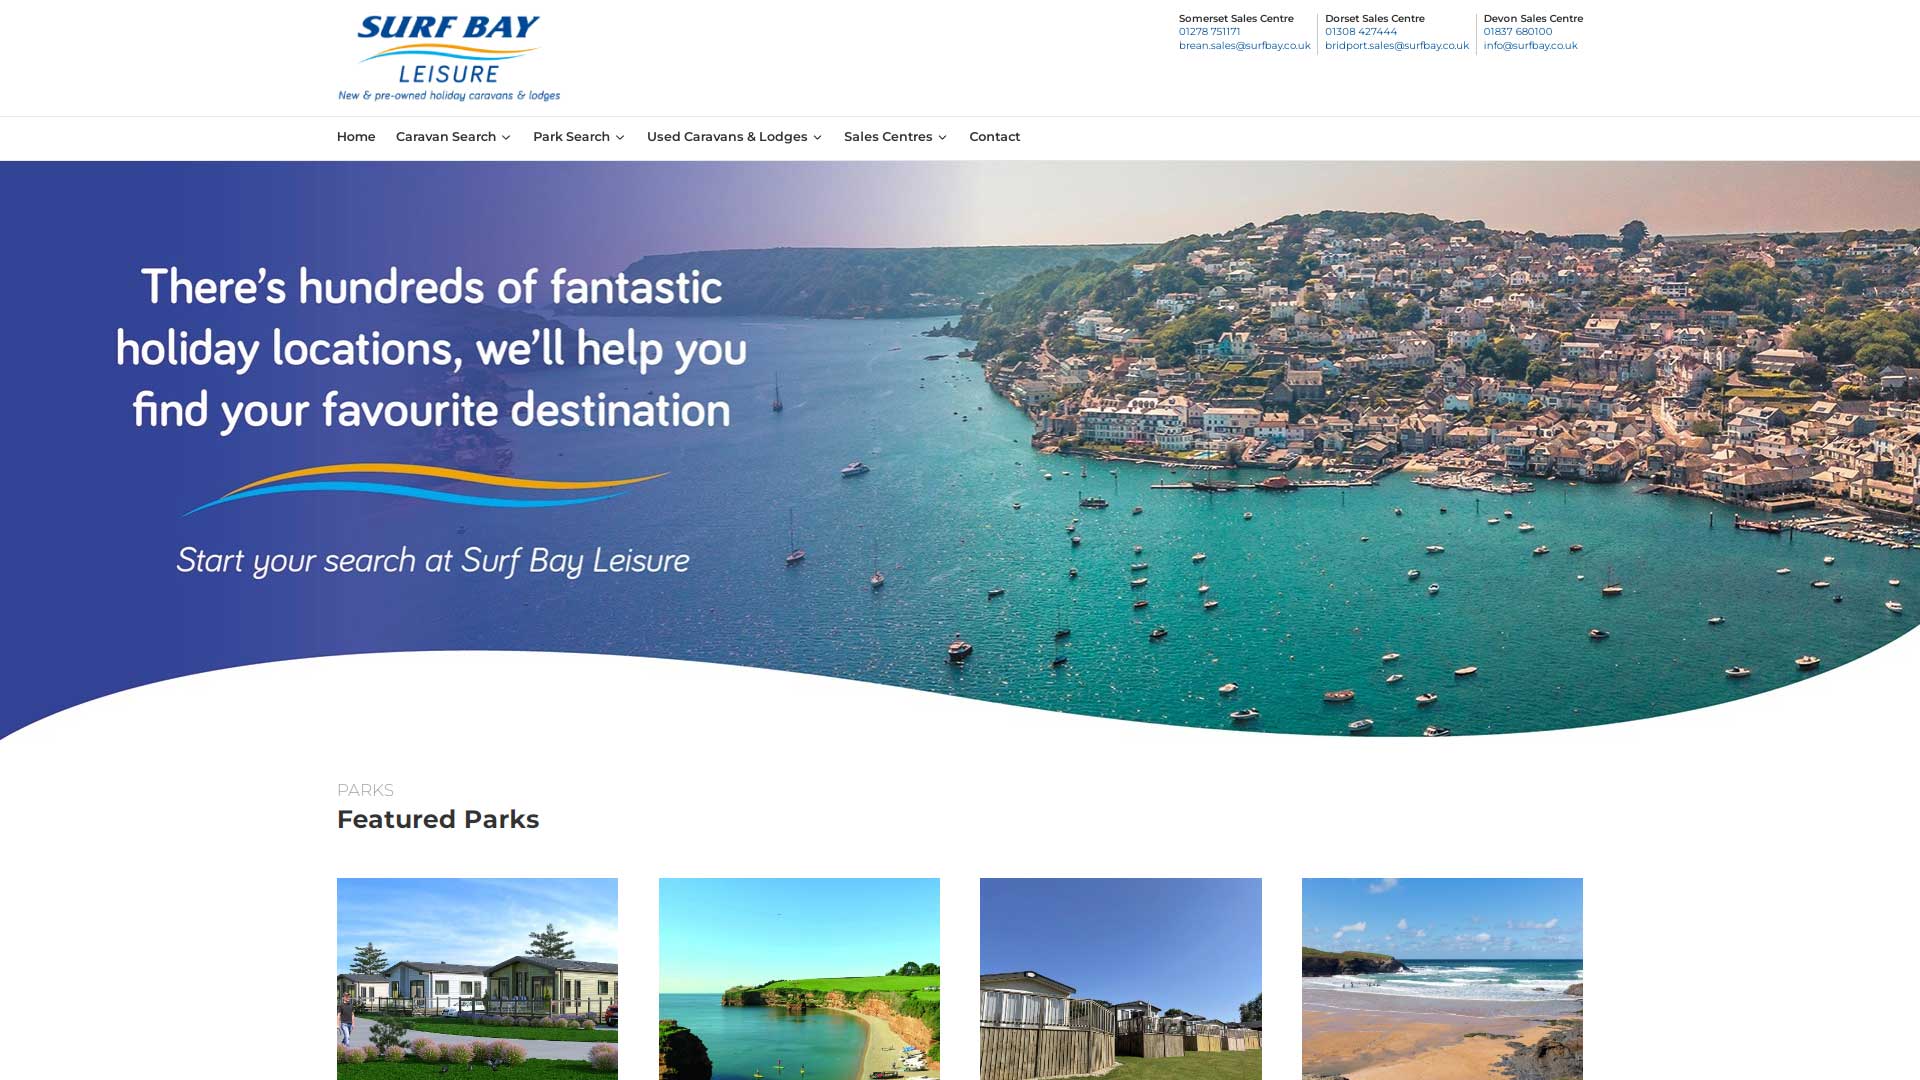 A view of the new Surfbay Leisure website on desktop